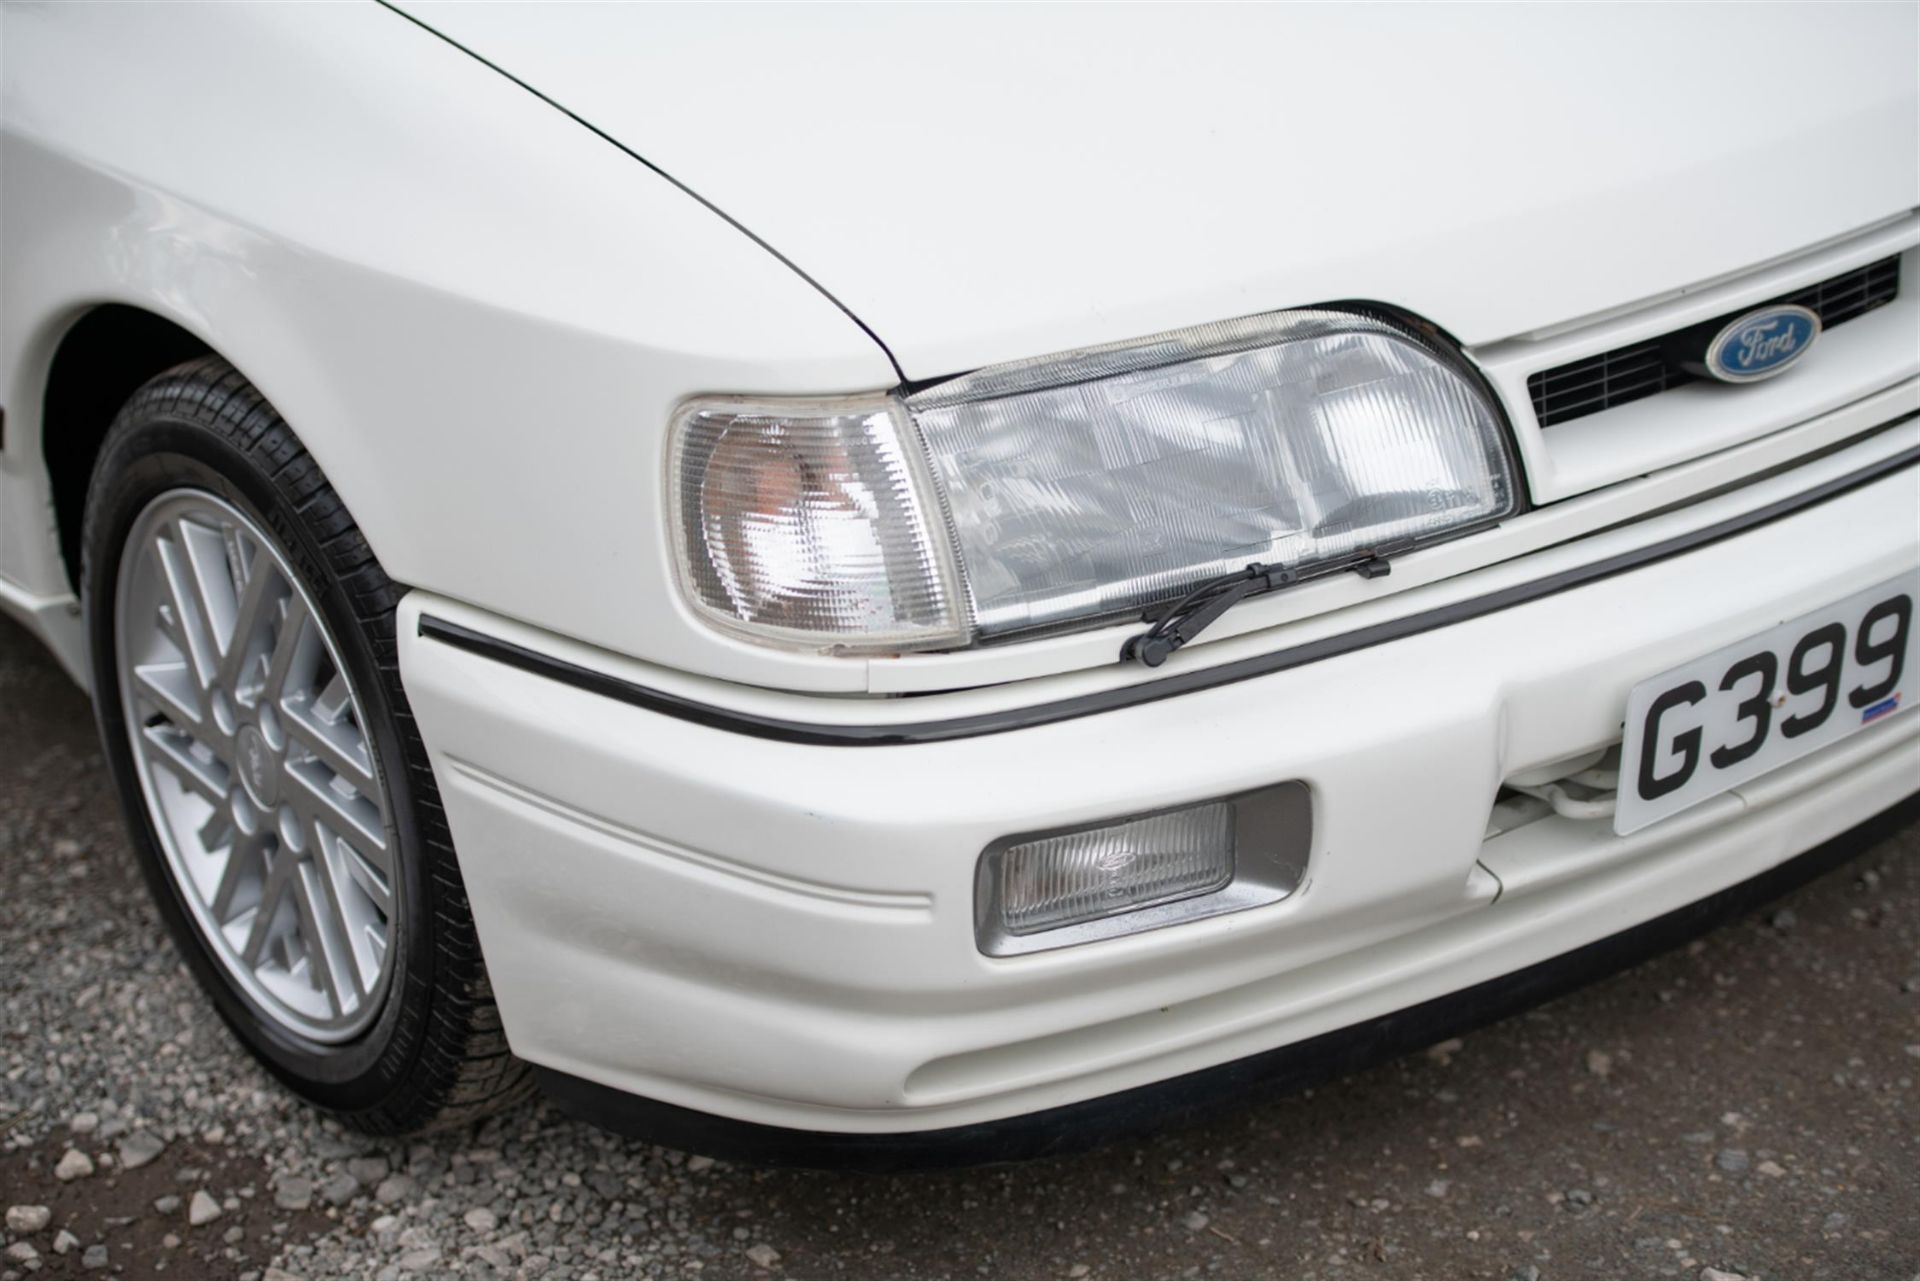 1989 Ford Sierra Sapphire RS Cosworth (2WD) - Image 9 of 10